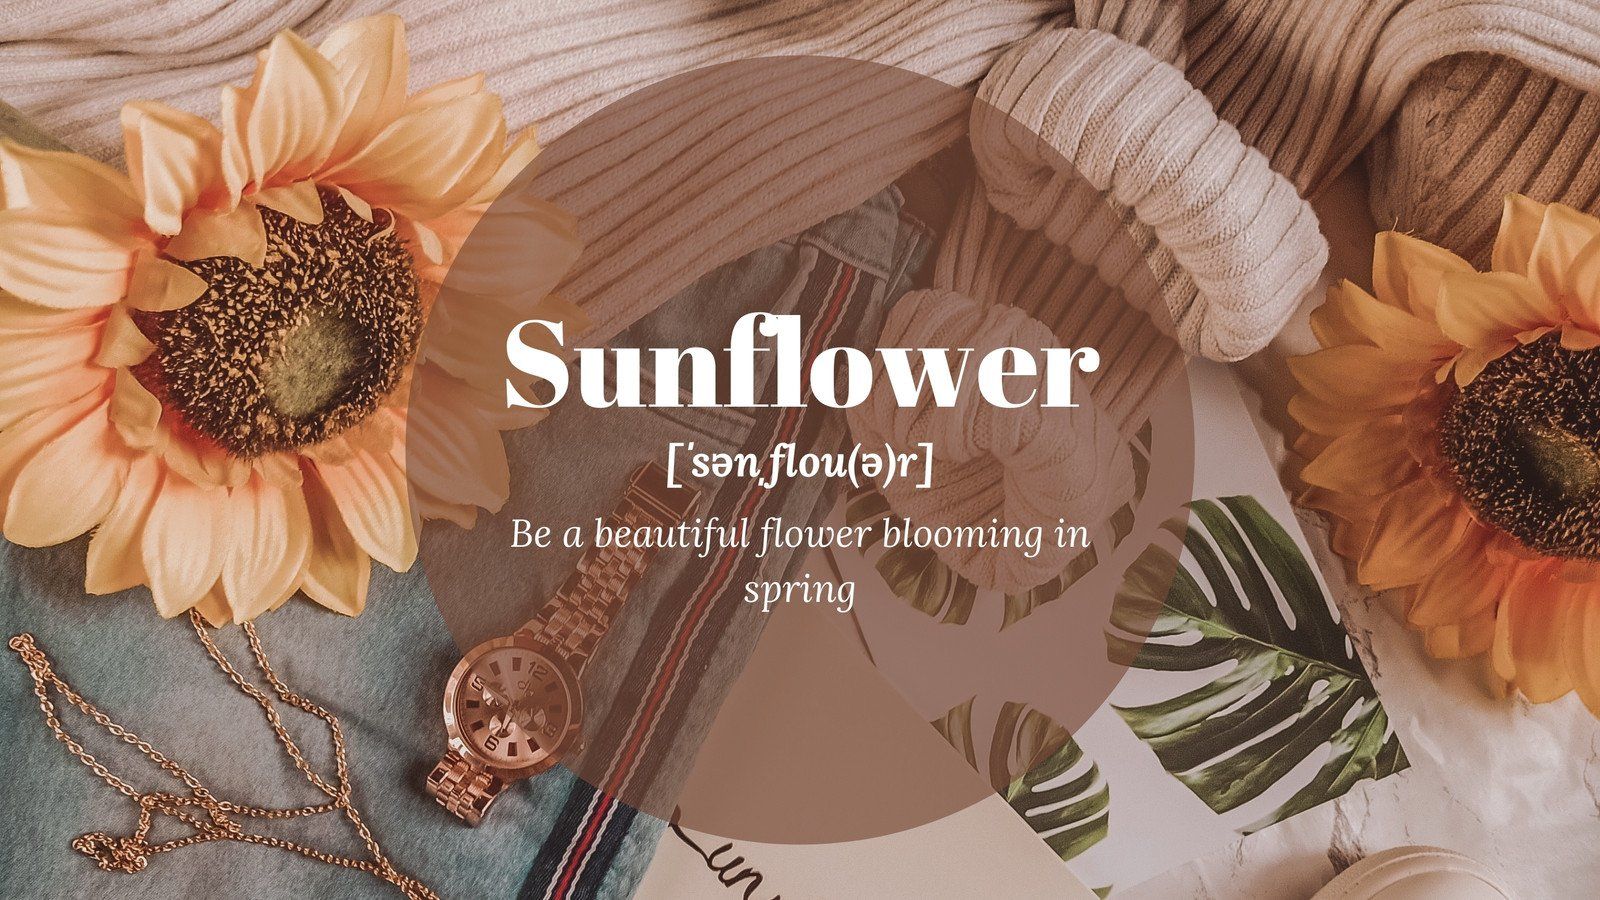 Sunflower, a beautiful flower blooming in spring. - Sunflower